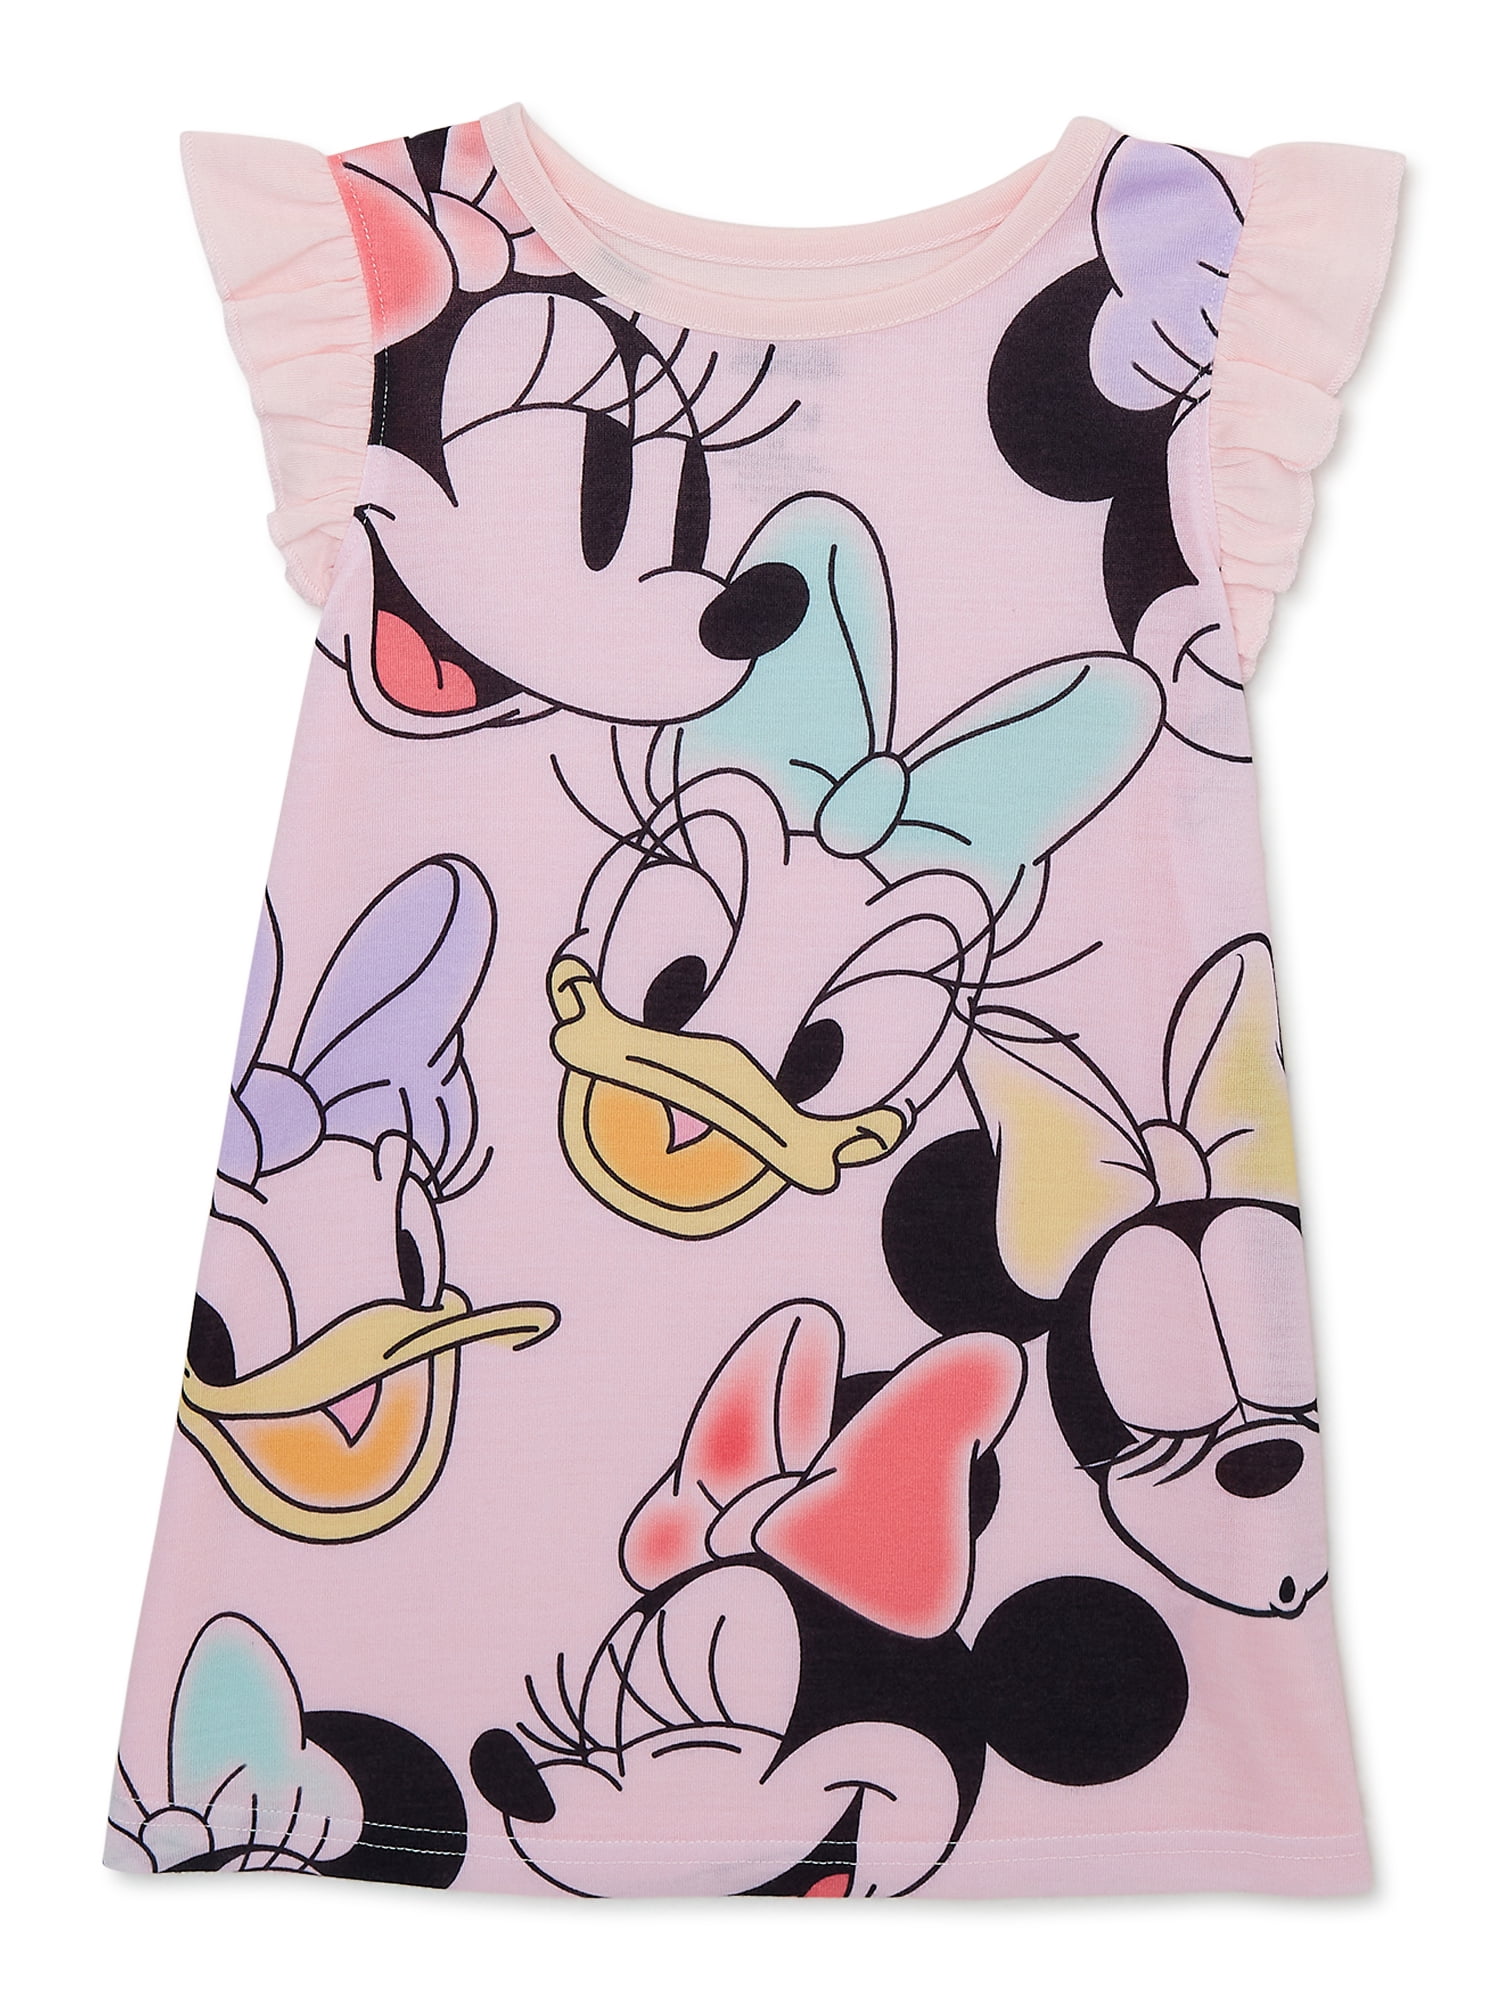 Disney Minnie Mouse Toddler Girls Pajama Nightgown, Sizes 2T-5T